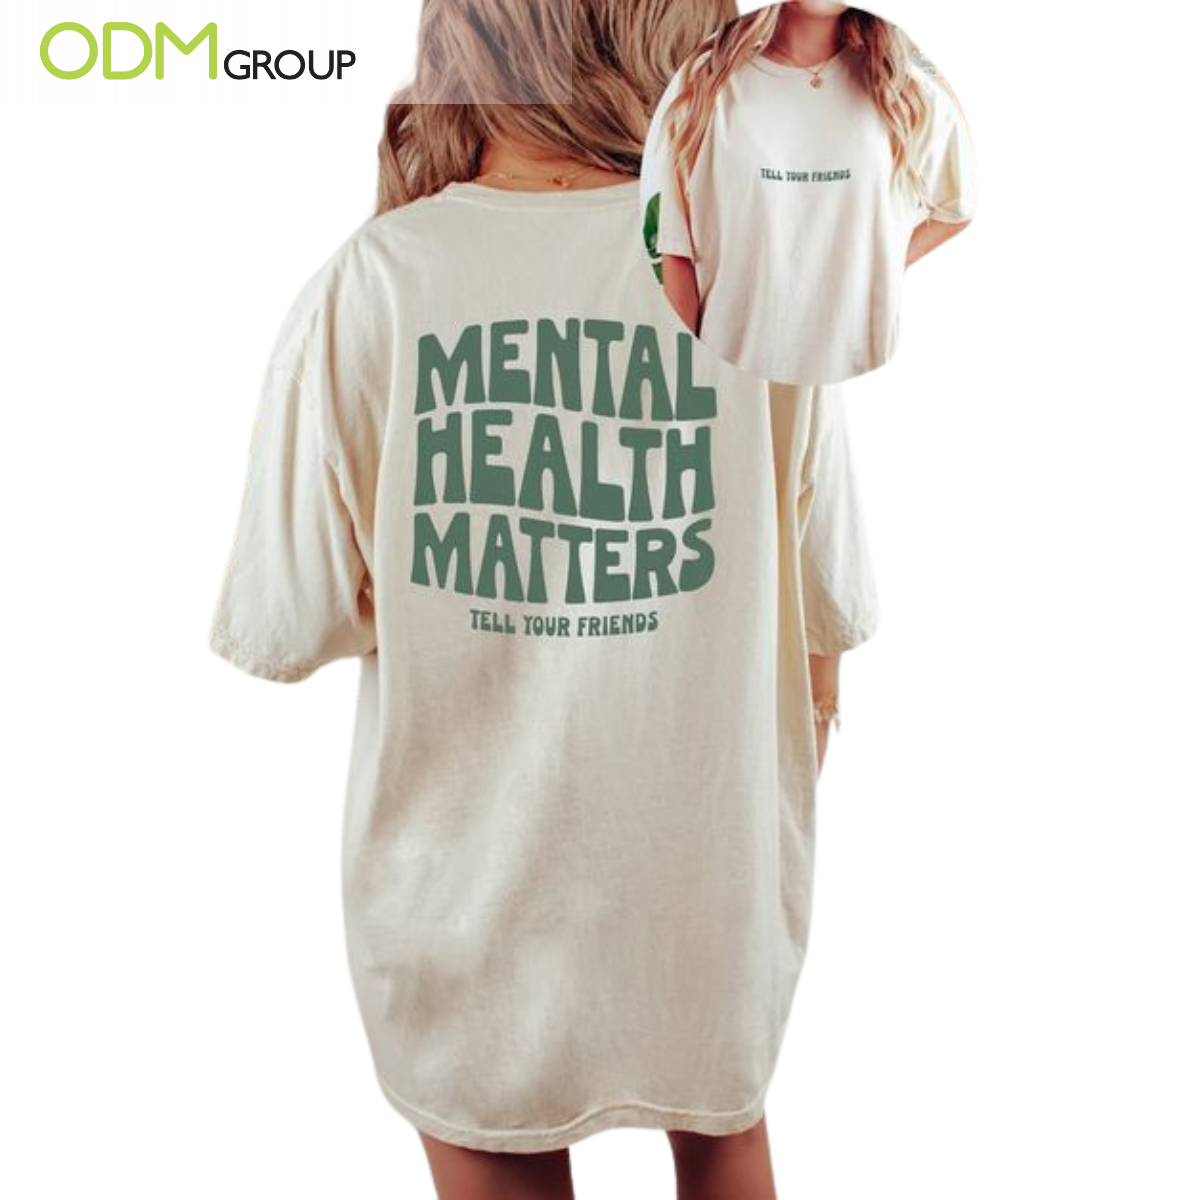 Custom t-shirt with the quote "Mental Health Matters."